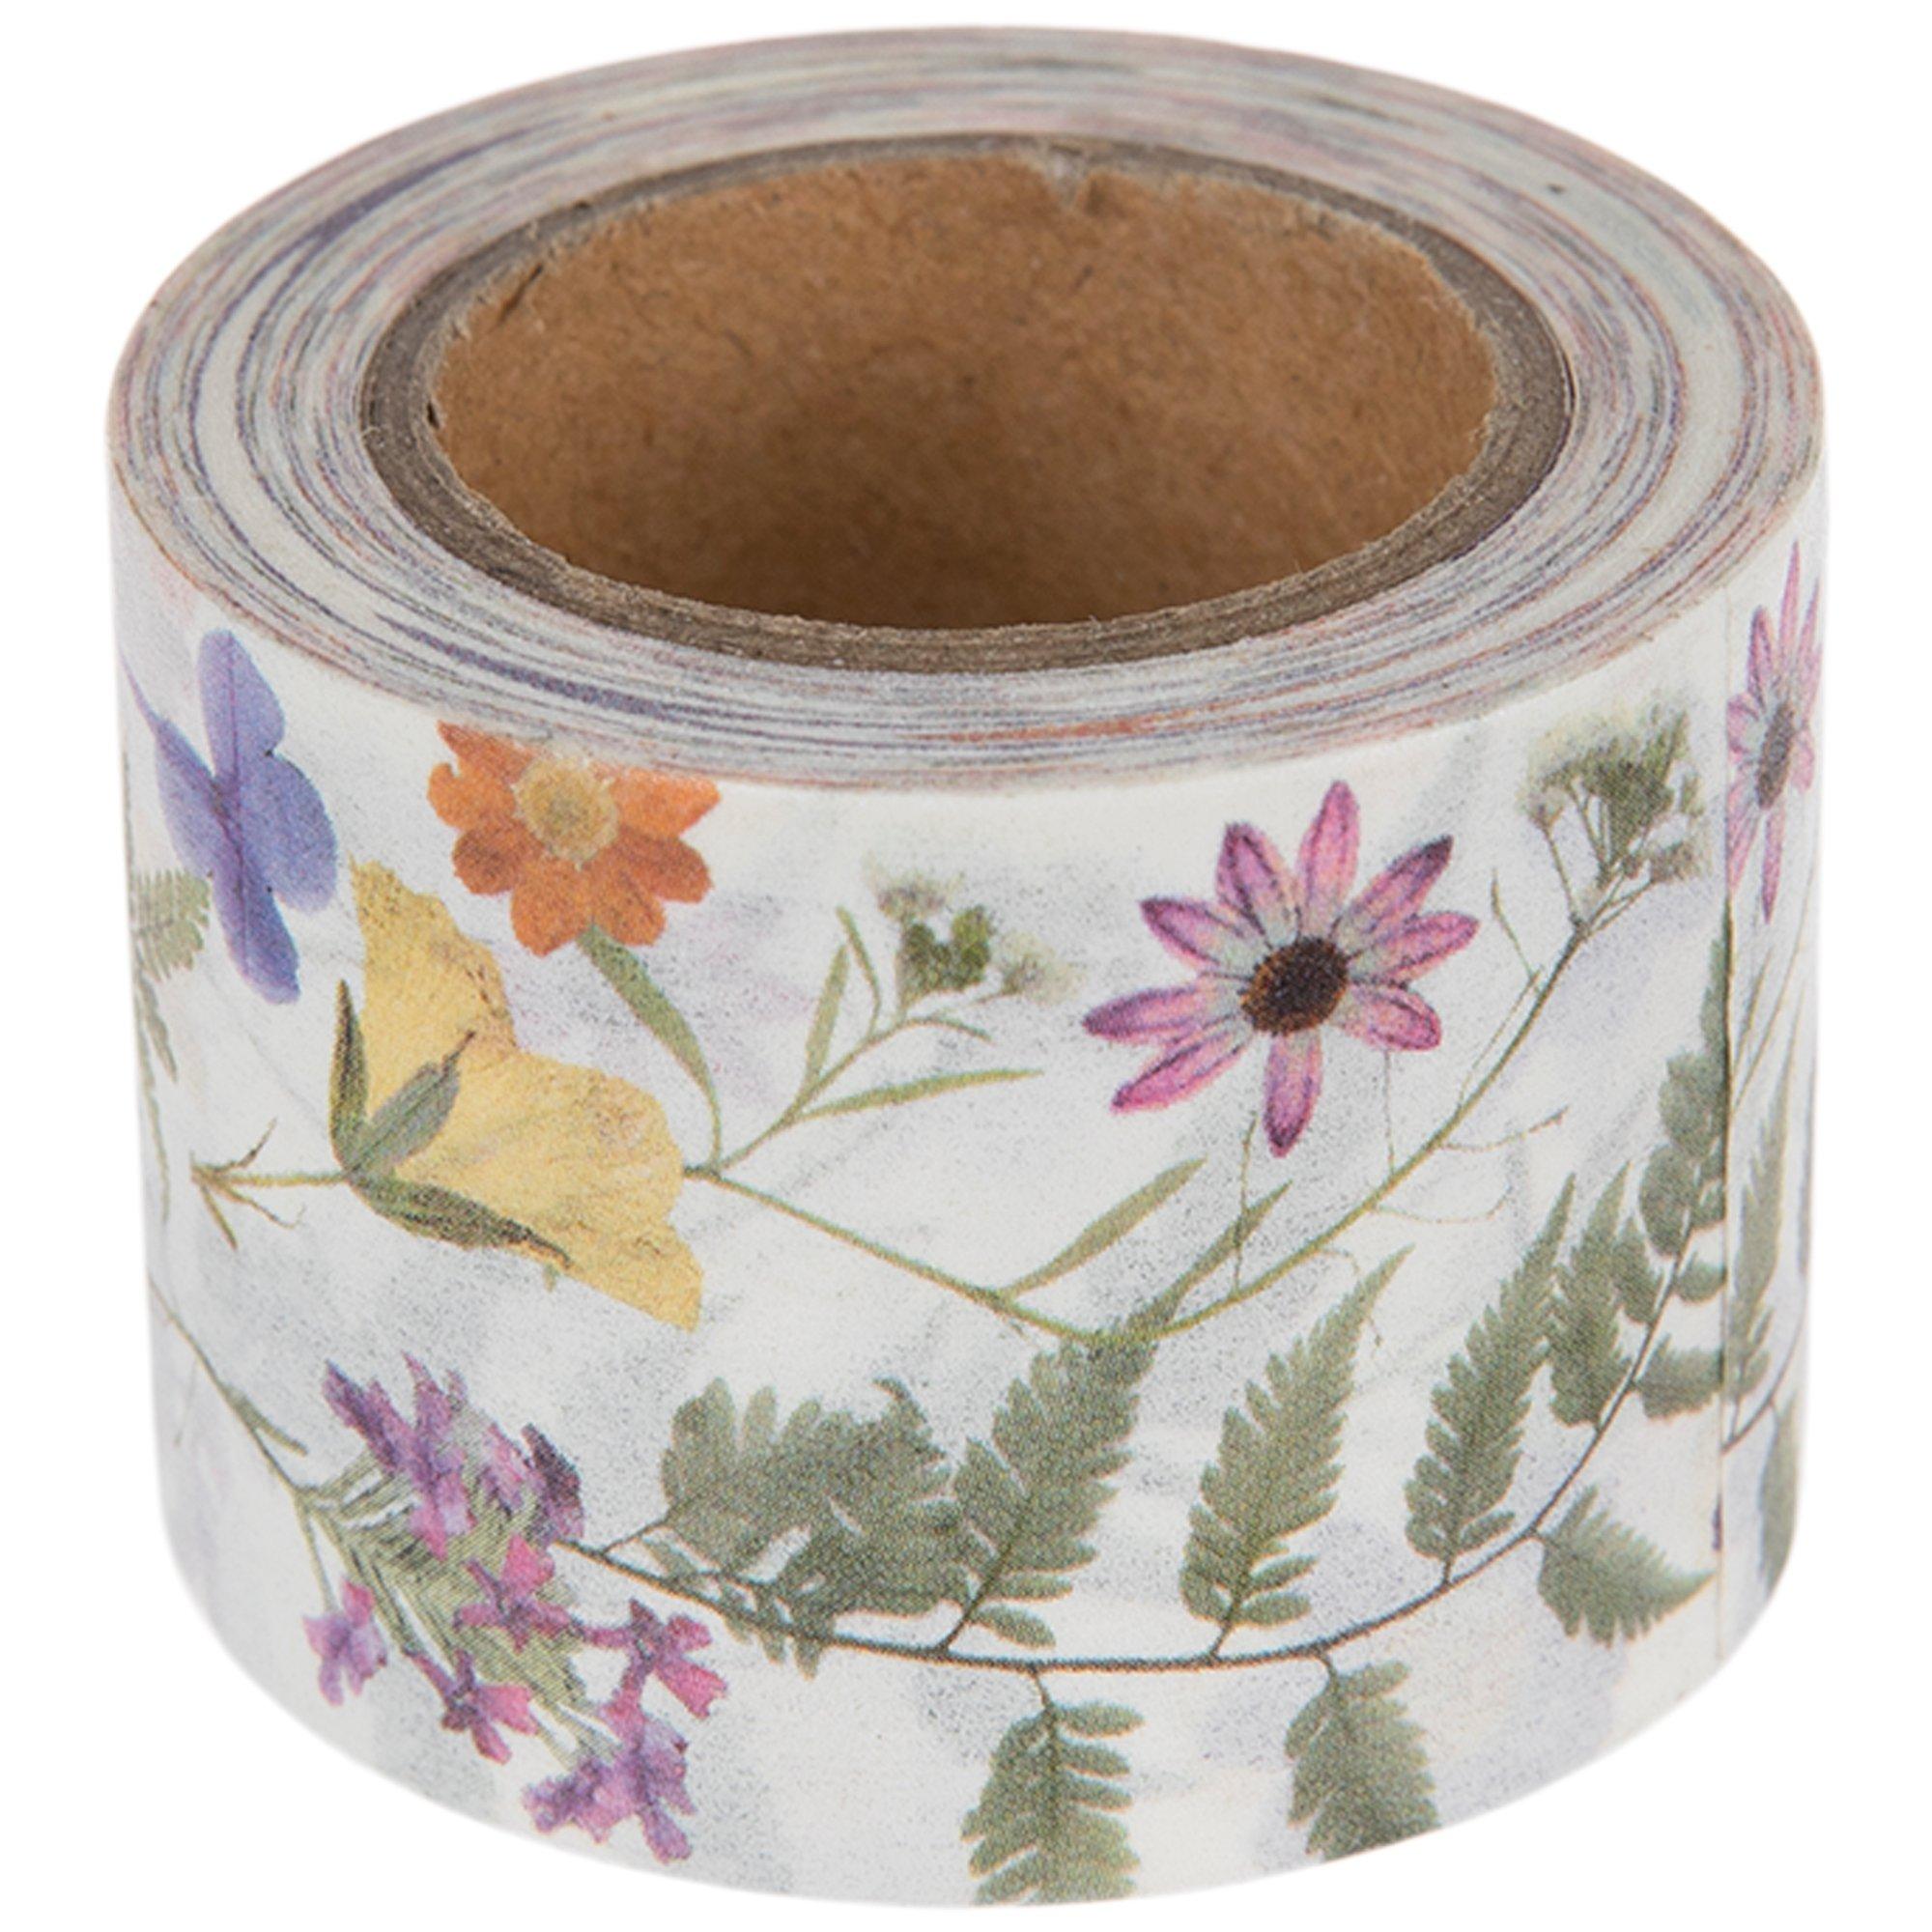 Pressed Floral Washi Tape, Hobby Lobby